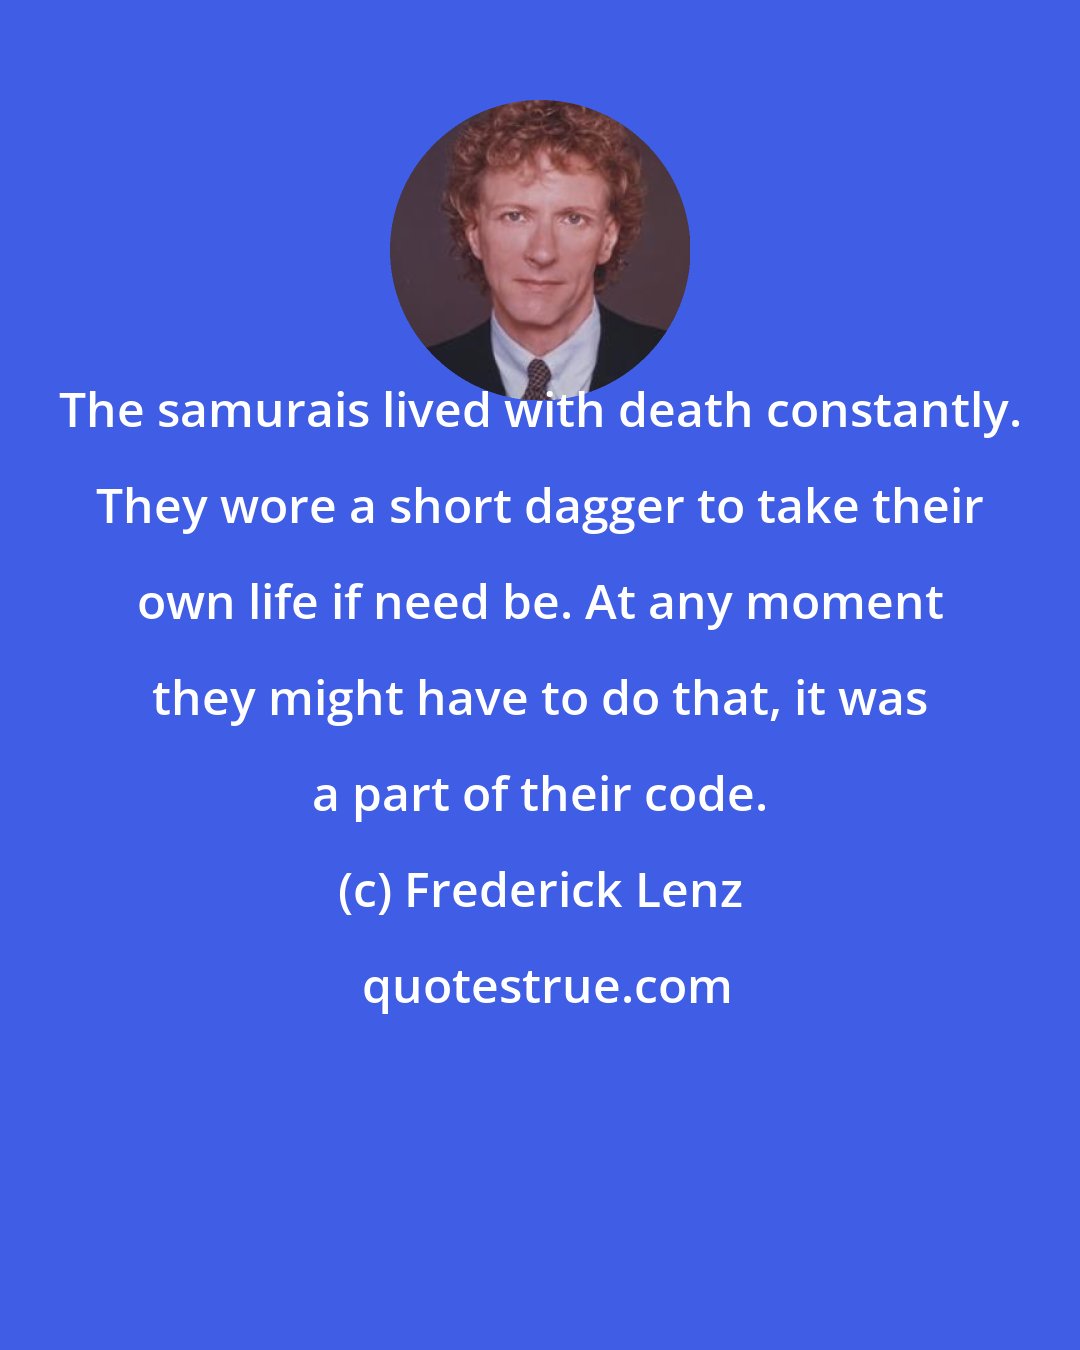 Frederick Lenz: The samurais lived with death constantly. They wore a short dagger to take their own life if need be. At any moment they might have to do that, it was a part of their code.